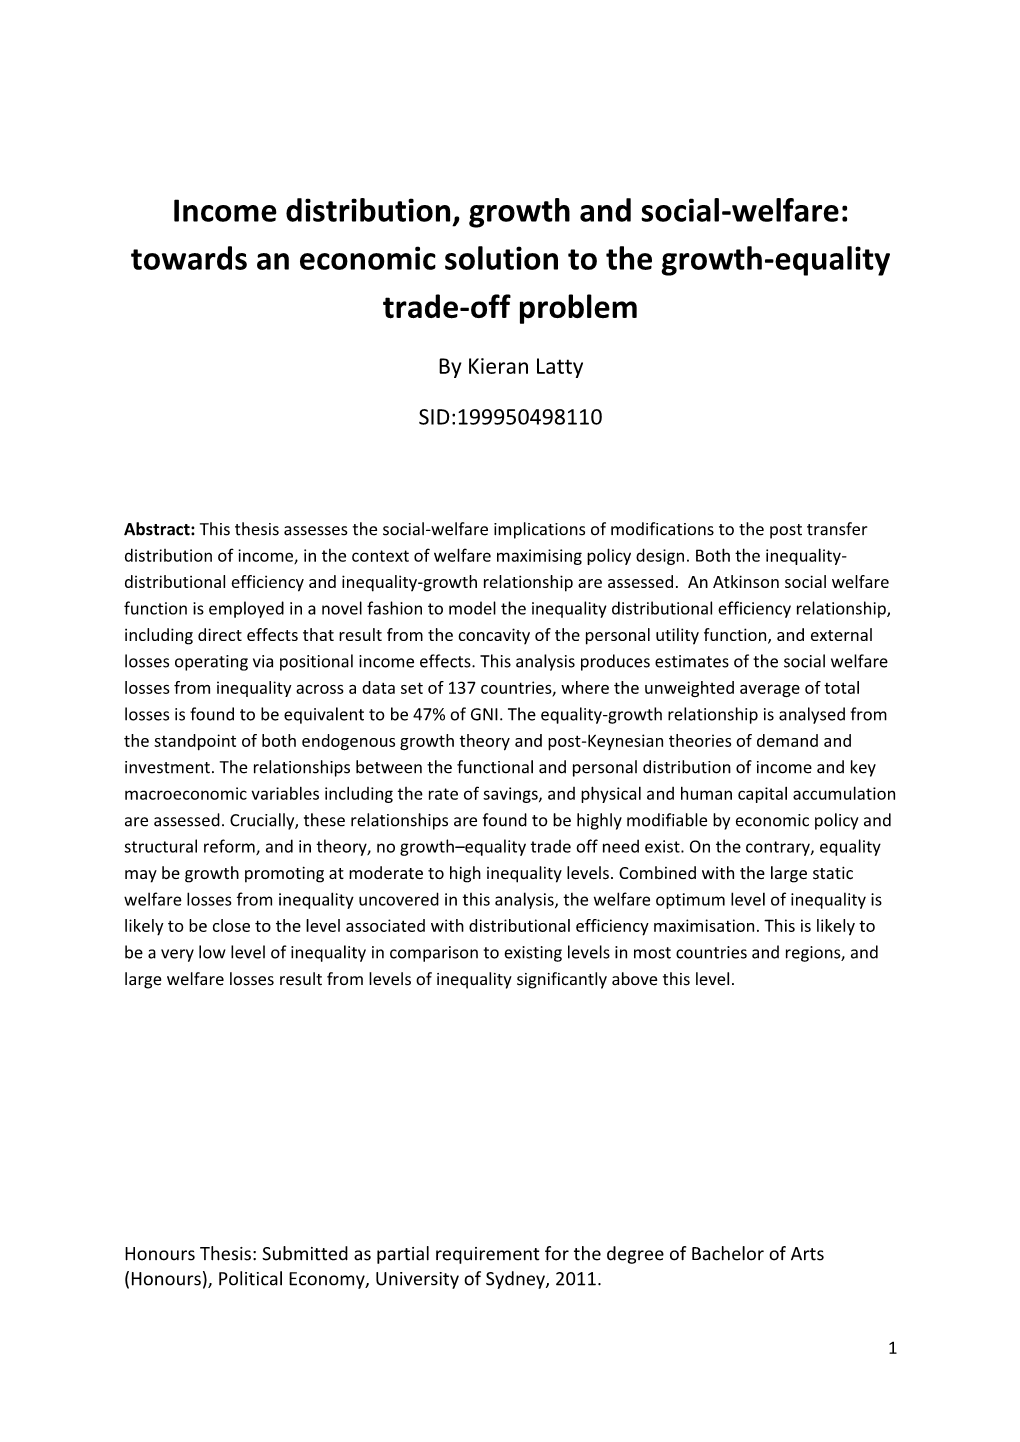 Income Distribution, Growth and Social-Welfare: Towards an Economic Solution to the Growth-Equality Trade-Off Problem